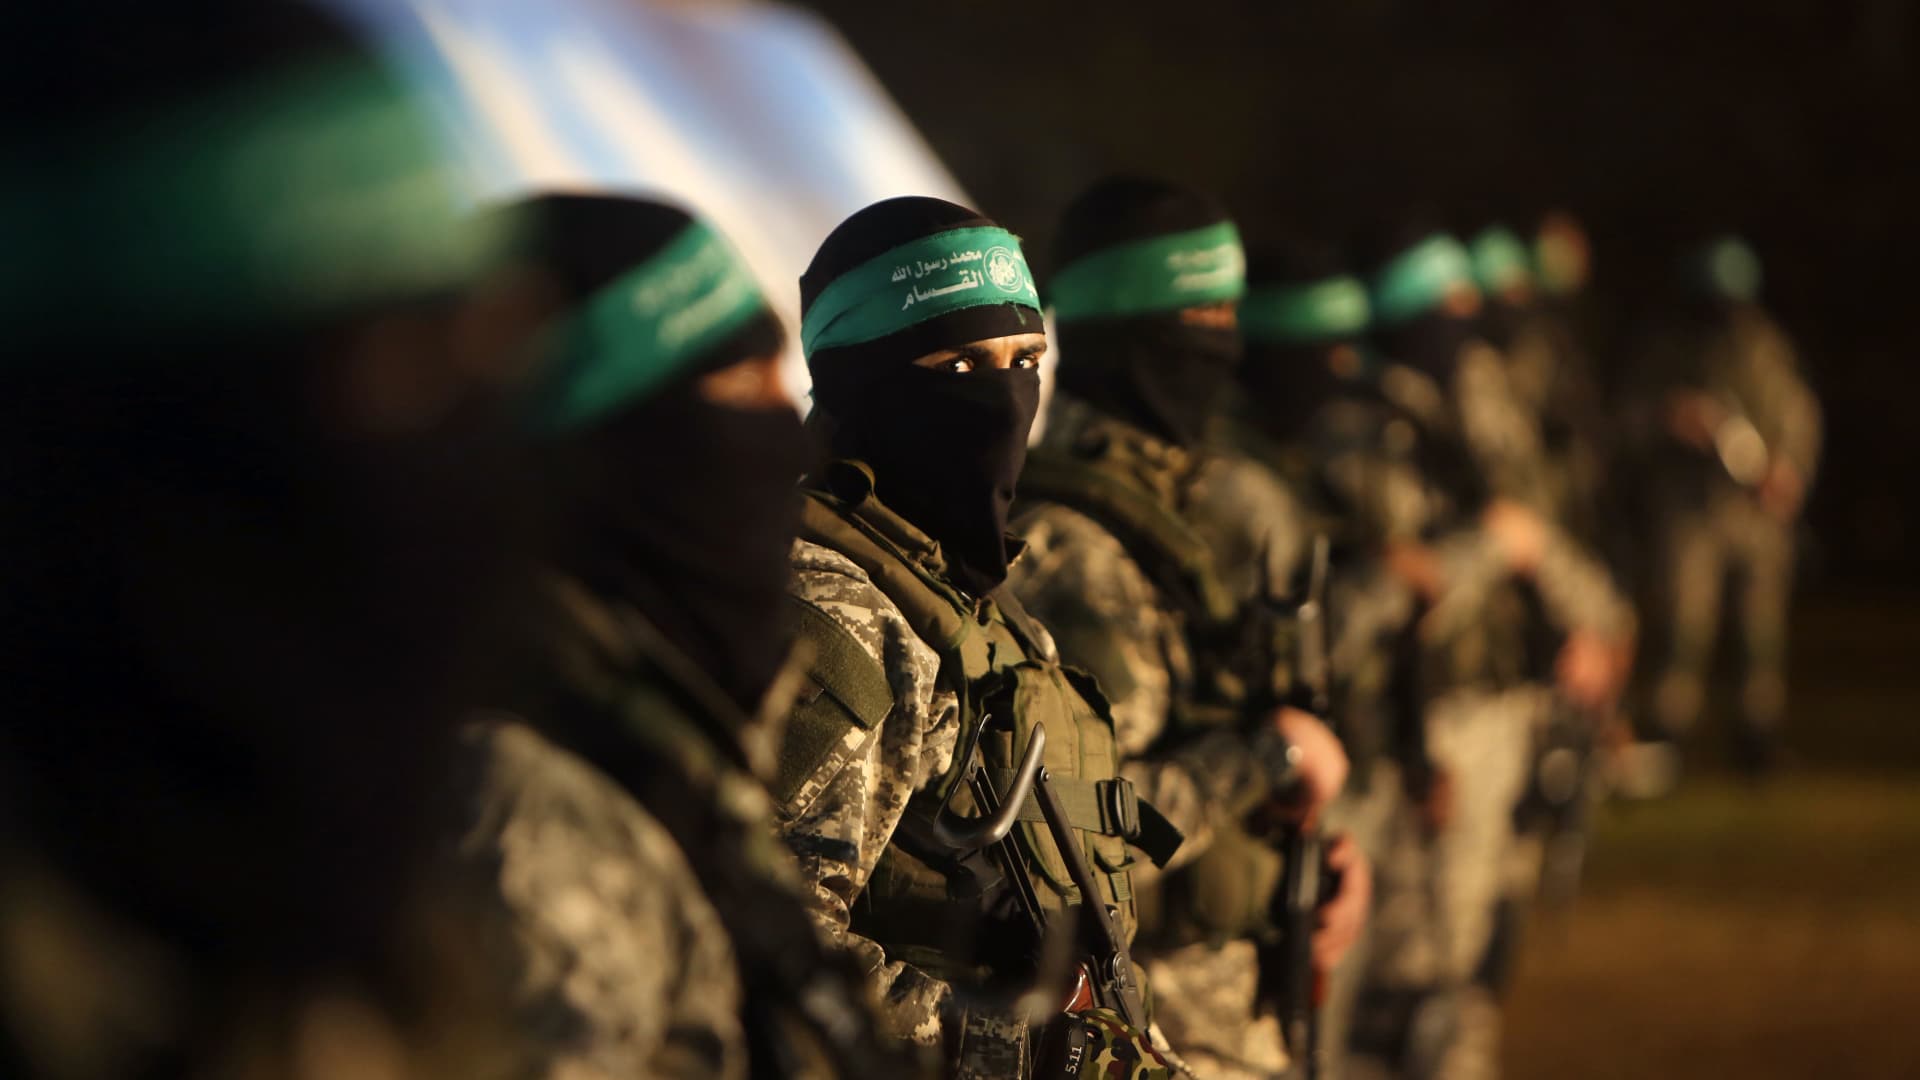 Palestinian members of the al-Qassam Brigades, the armed wing of the Hamas movement, take part in a gathering on Jan. 31, 2016, in Gaza City to pay tribute to their fellow militants who died after a tunnel collapsed in the Gaza Strip.